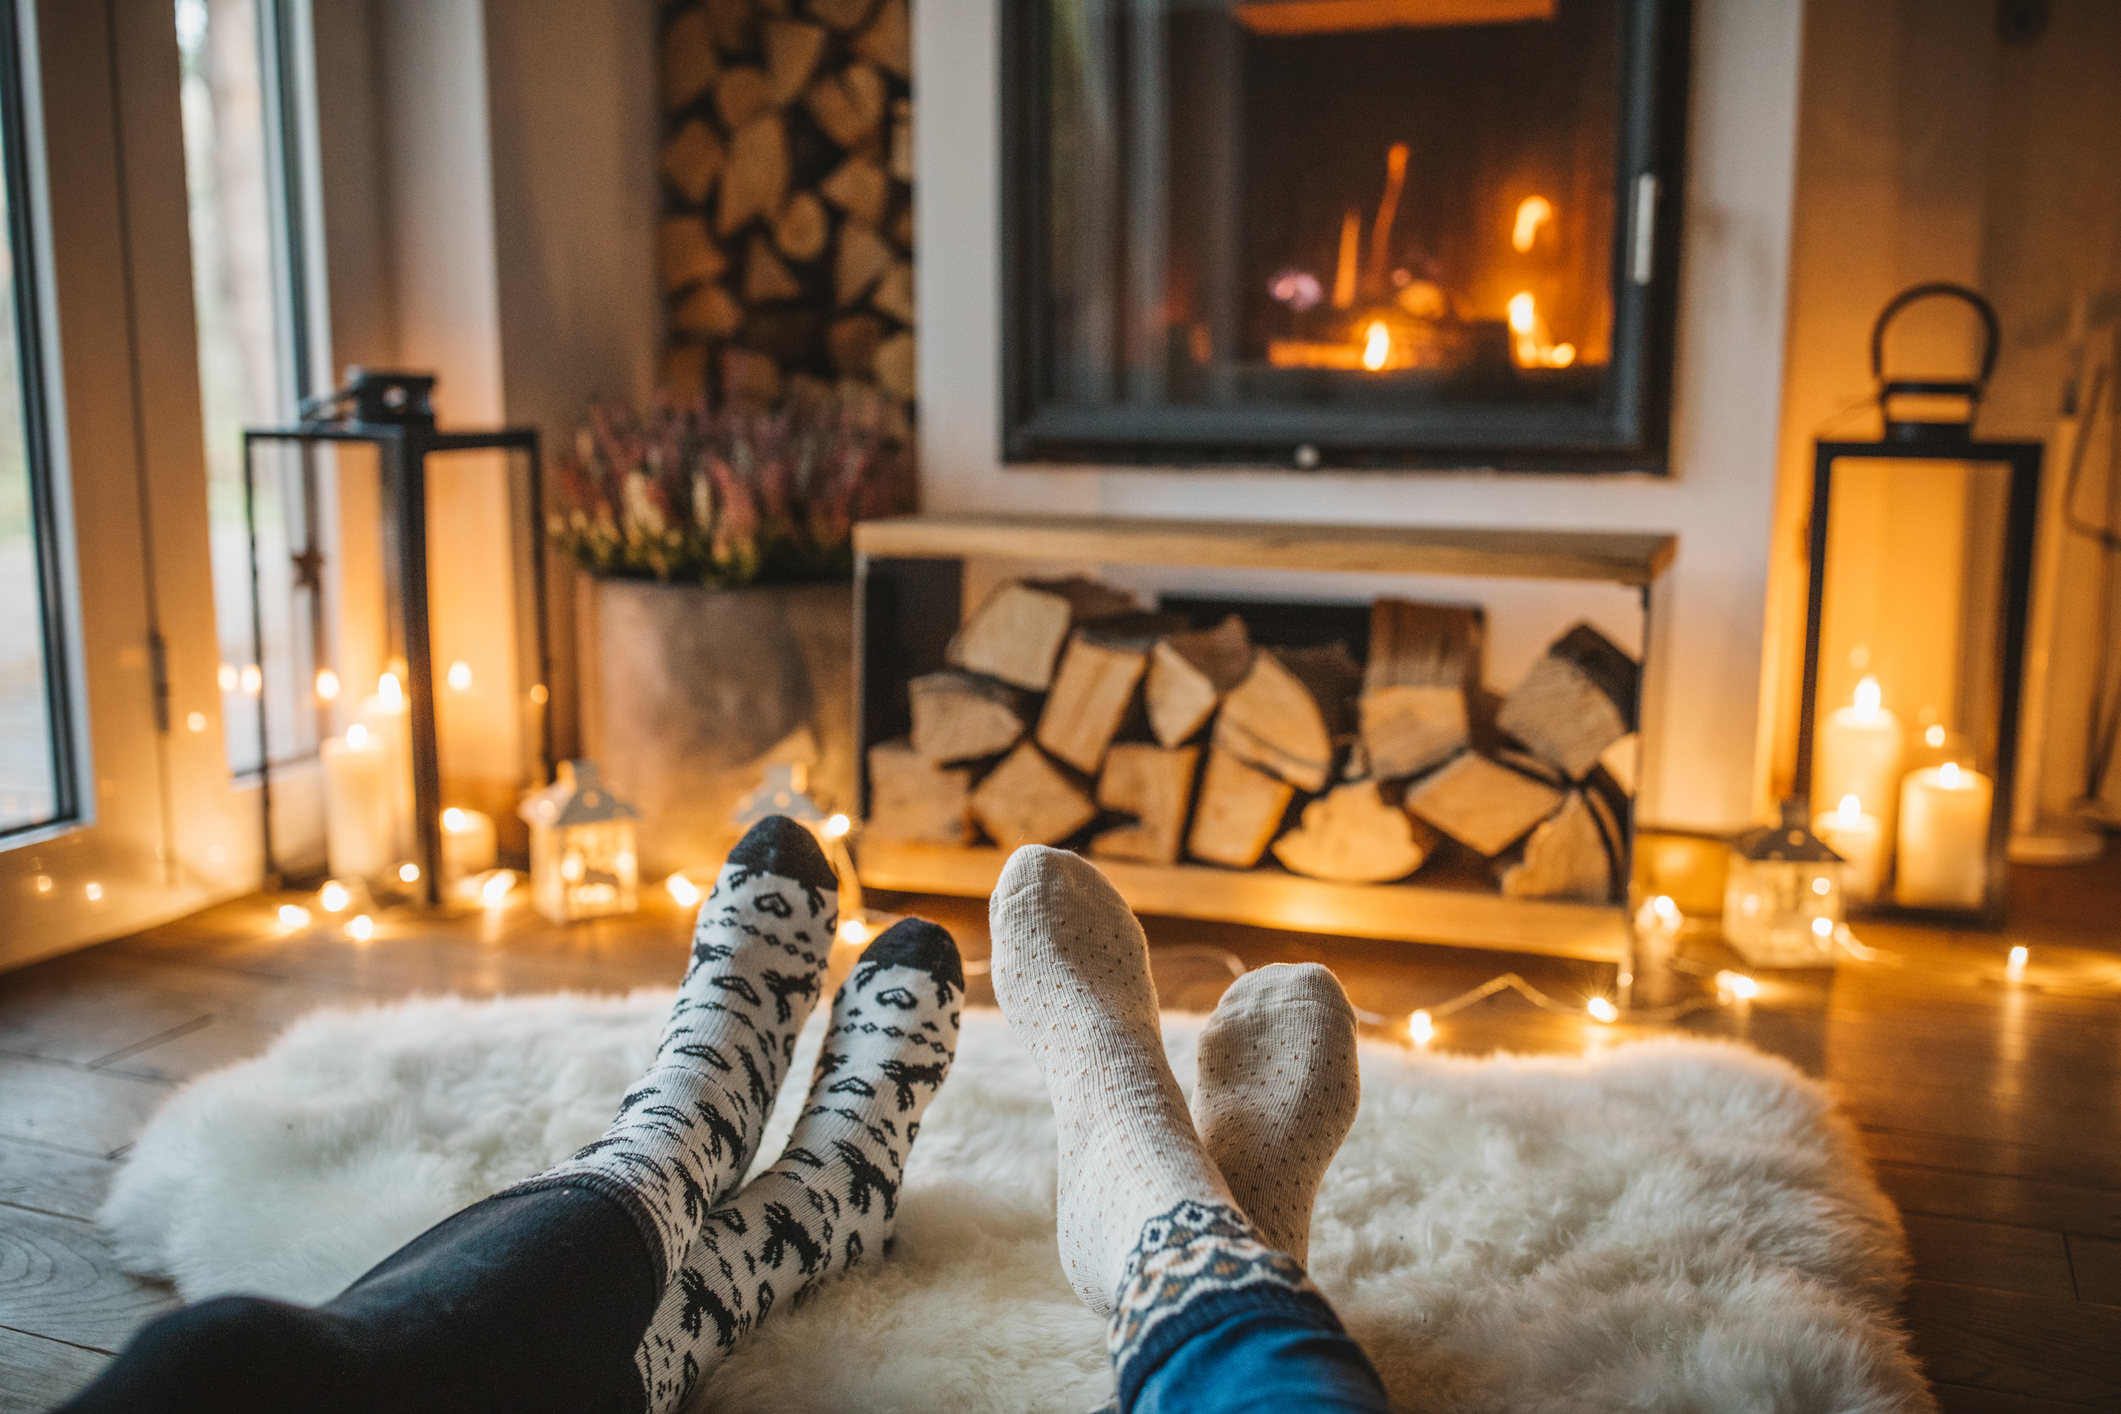 Two people propping their feet up in front of a fire